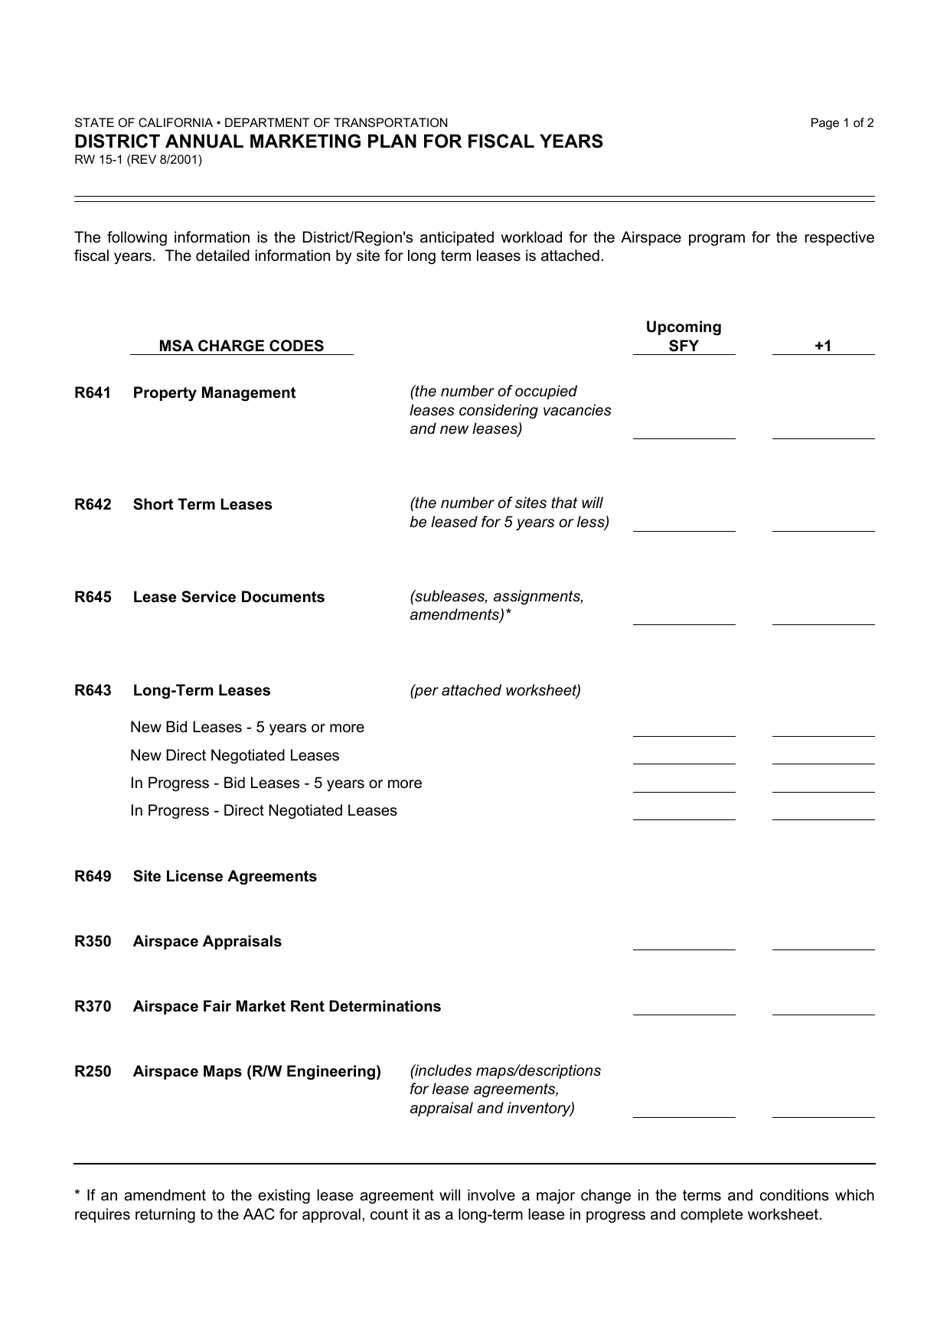 Form RW15-1 District Annual Marketing Plan for Fiscal Years - California, Page 1